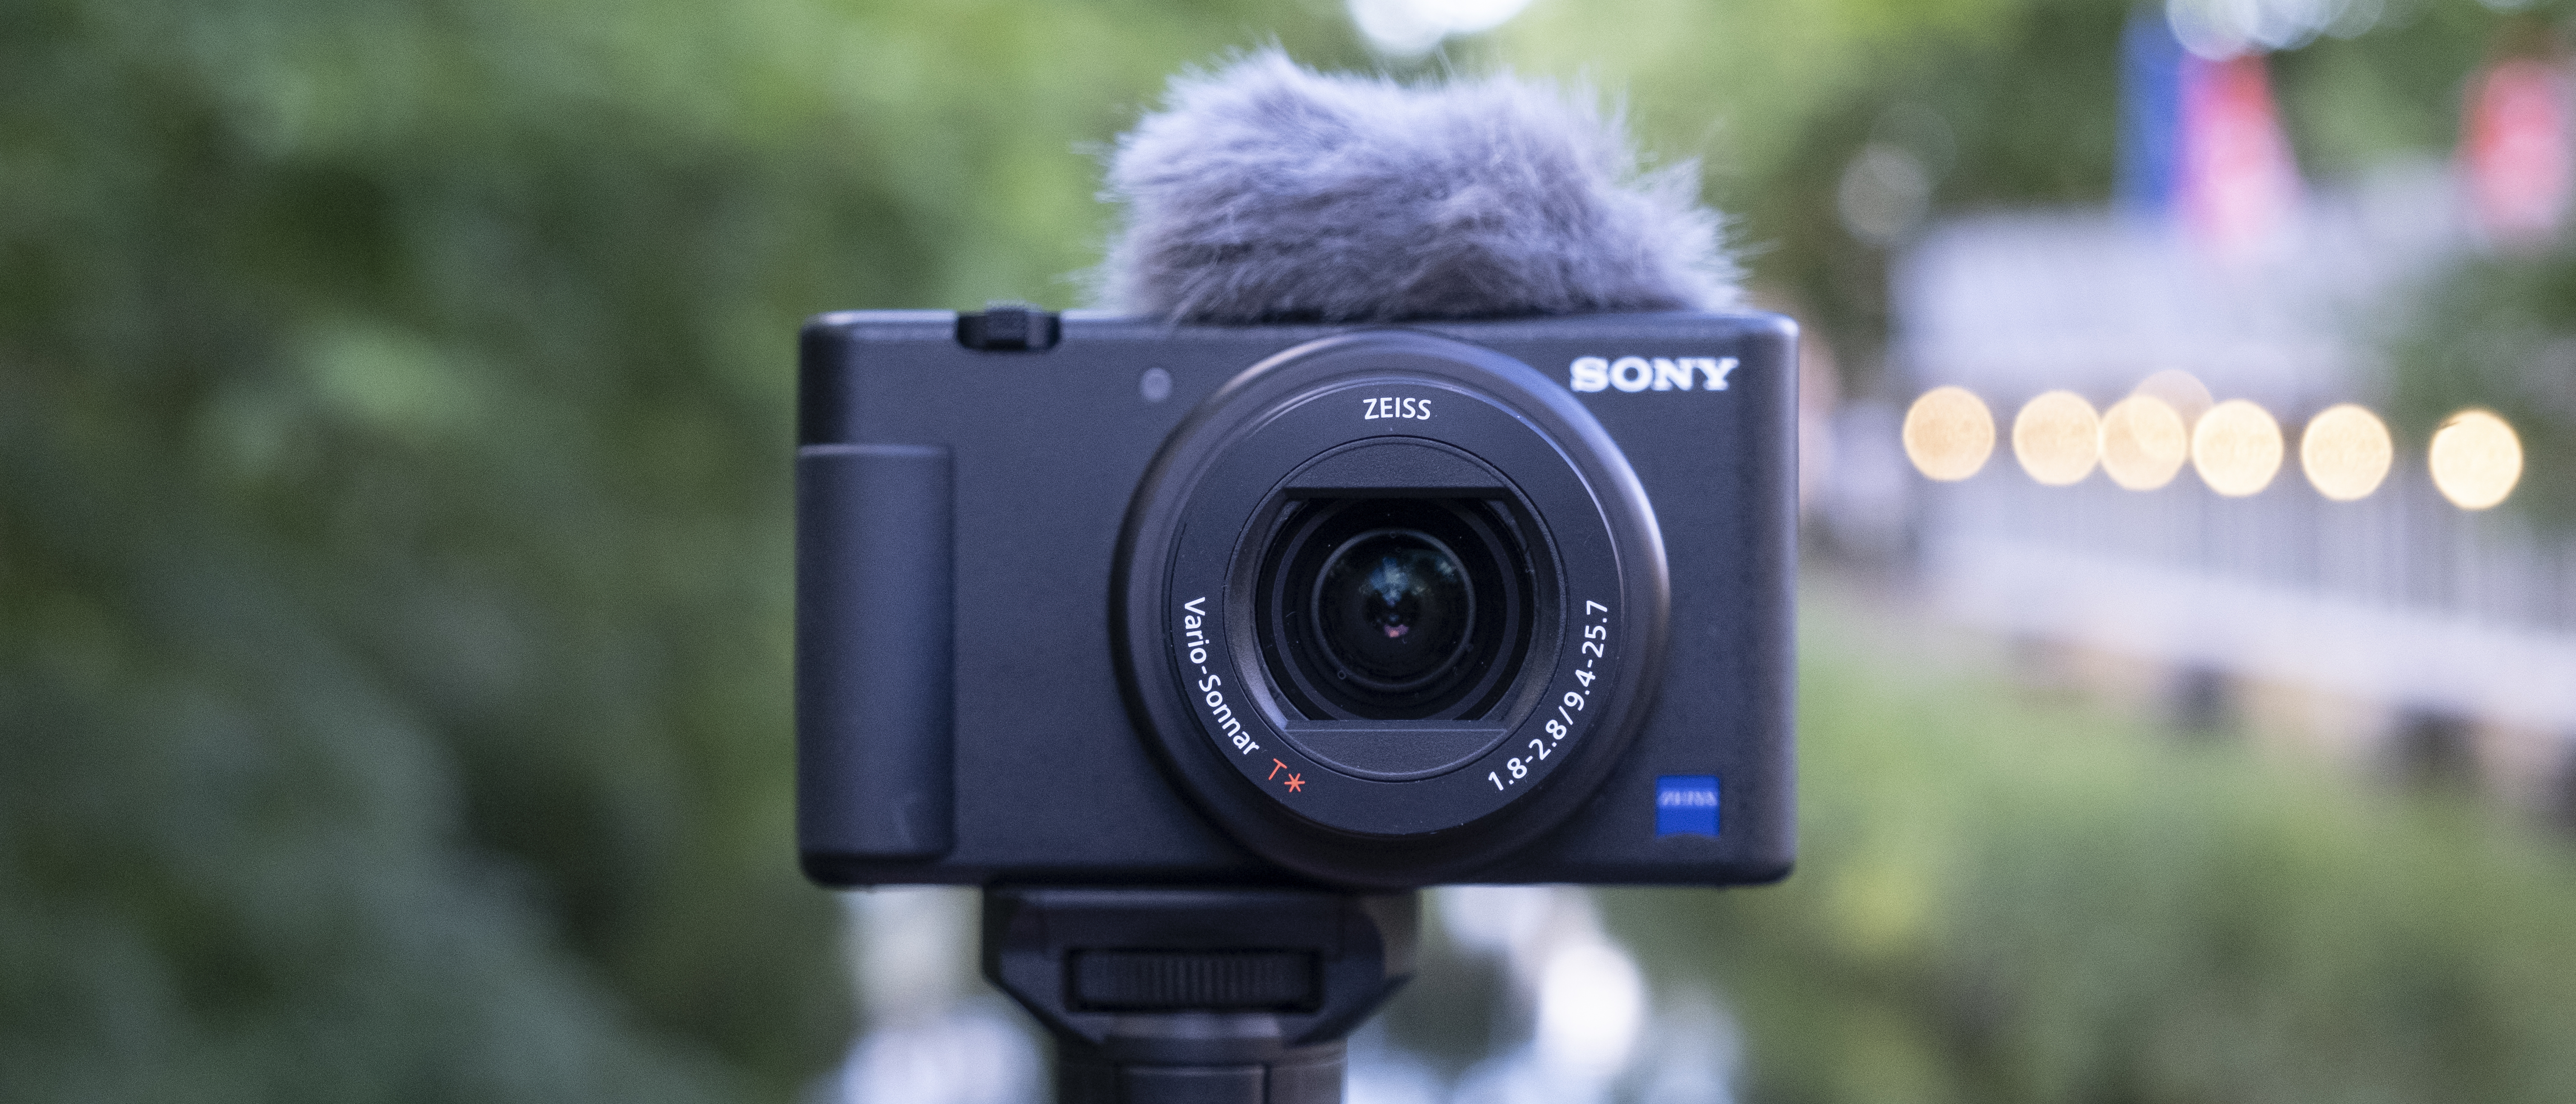 Best Vlogging Camera? // Sony ZV-1 Hands-On Review 